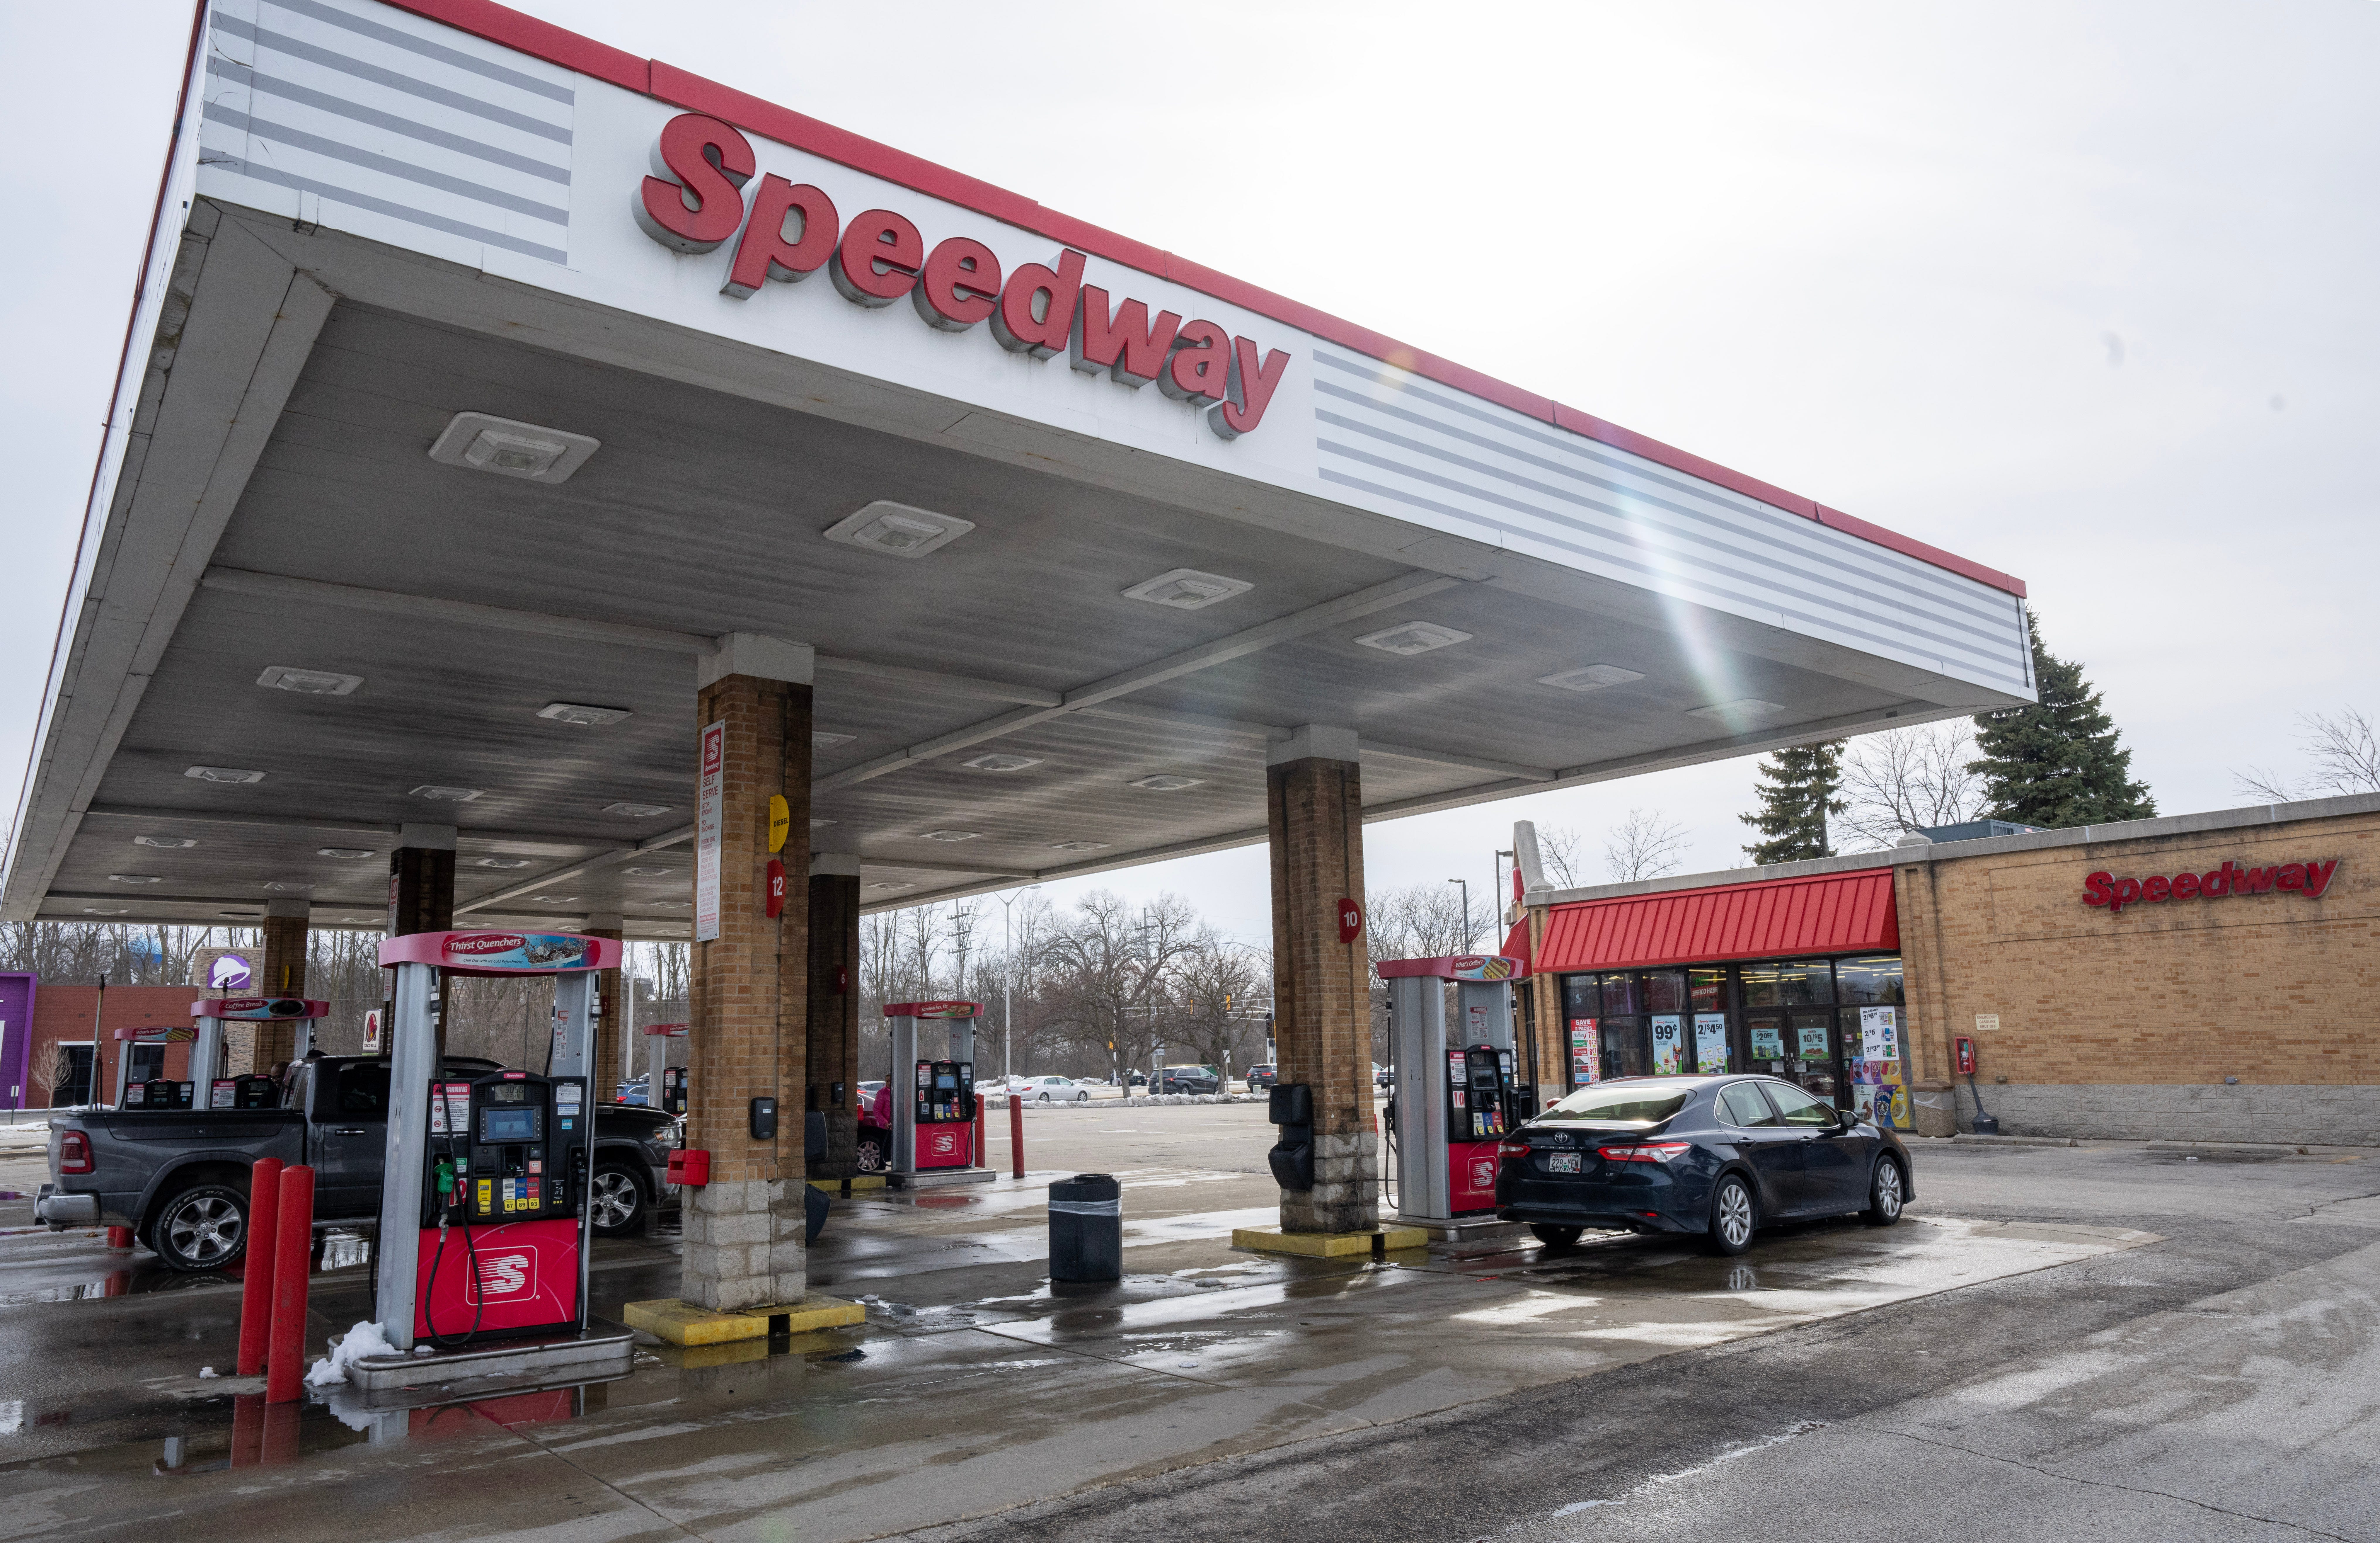 The Speedway gas station in Germantown, Wis., where, according to police records, Nicholas Howell was pulled over in the early hours of March 10, 2021, before leading officers on a high-speed chase.